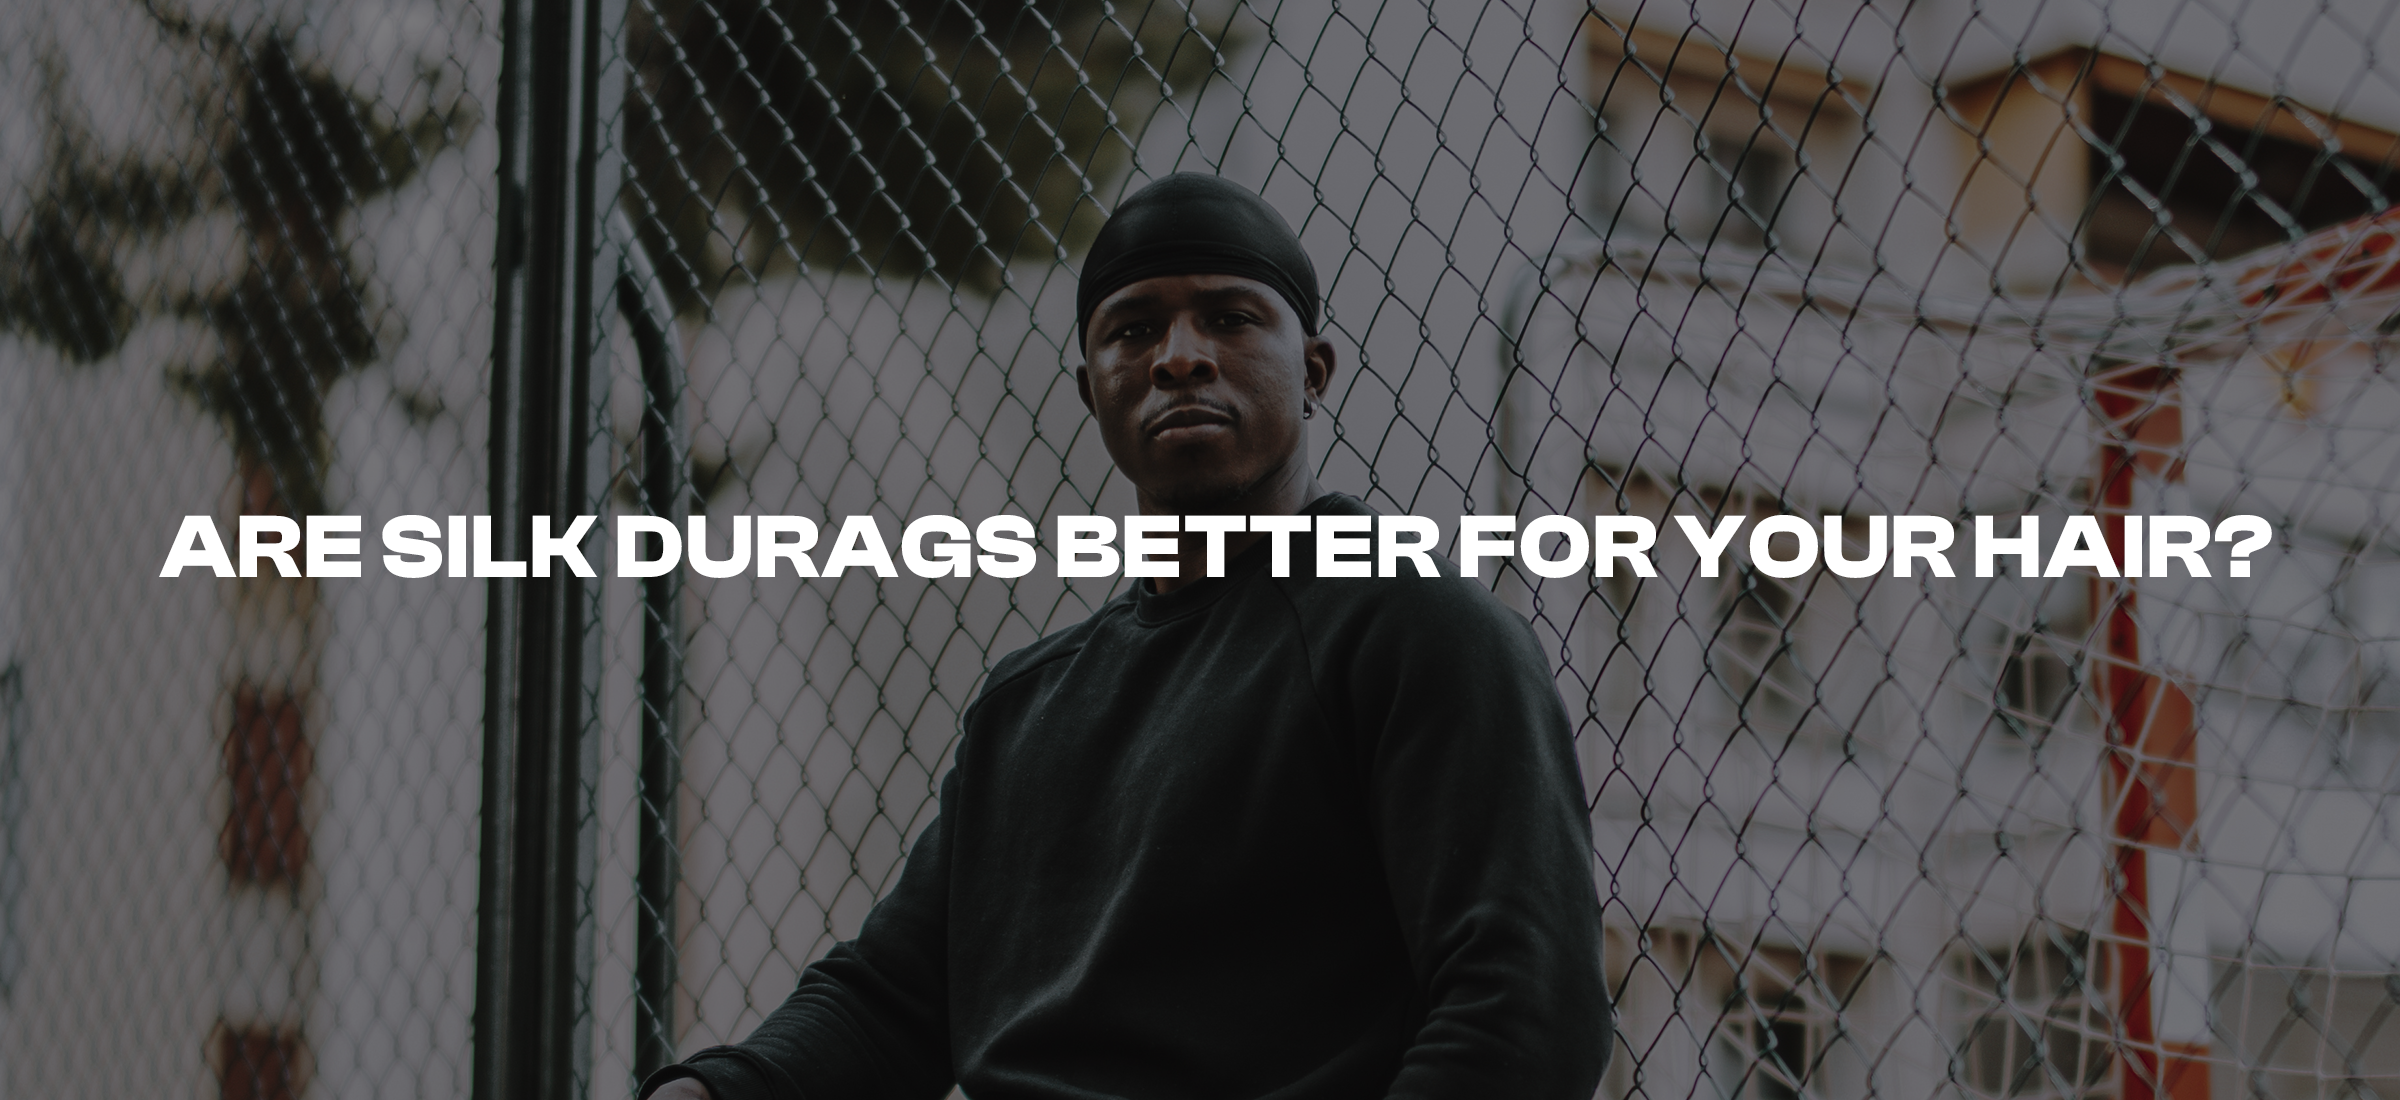 Are Silk Durags Better for Your Hair? Pros and Cons to Consider